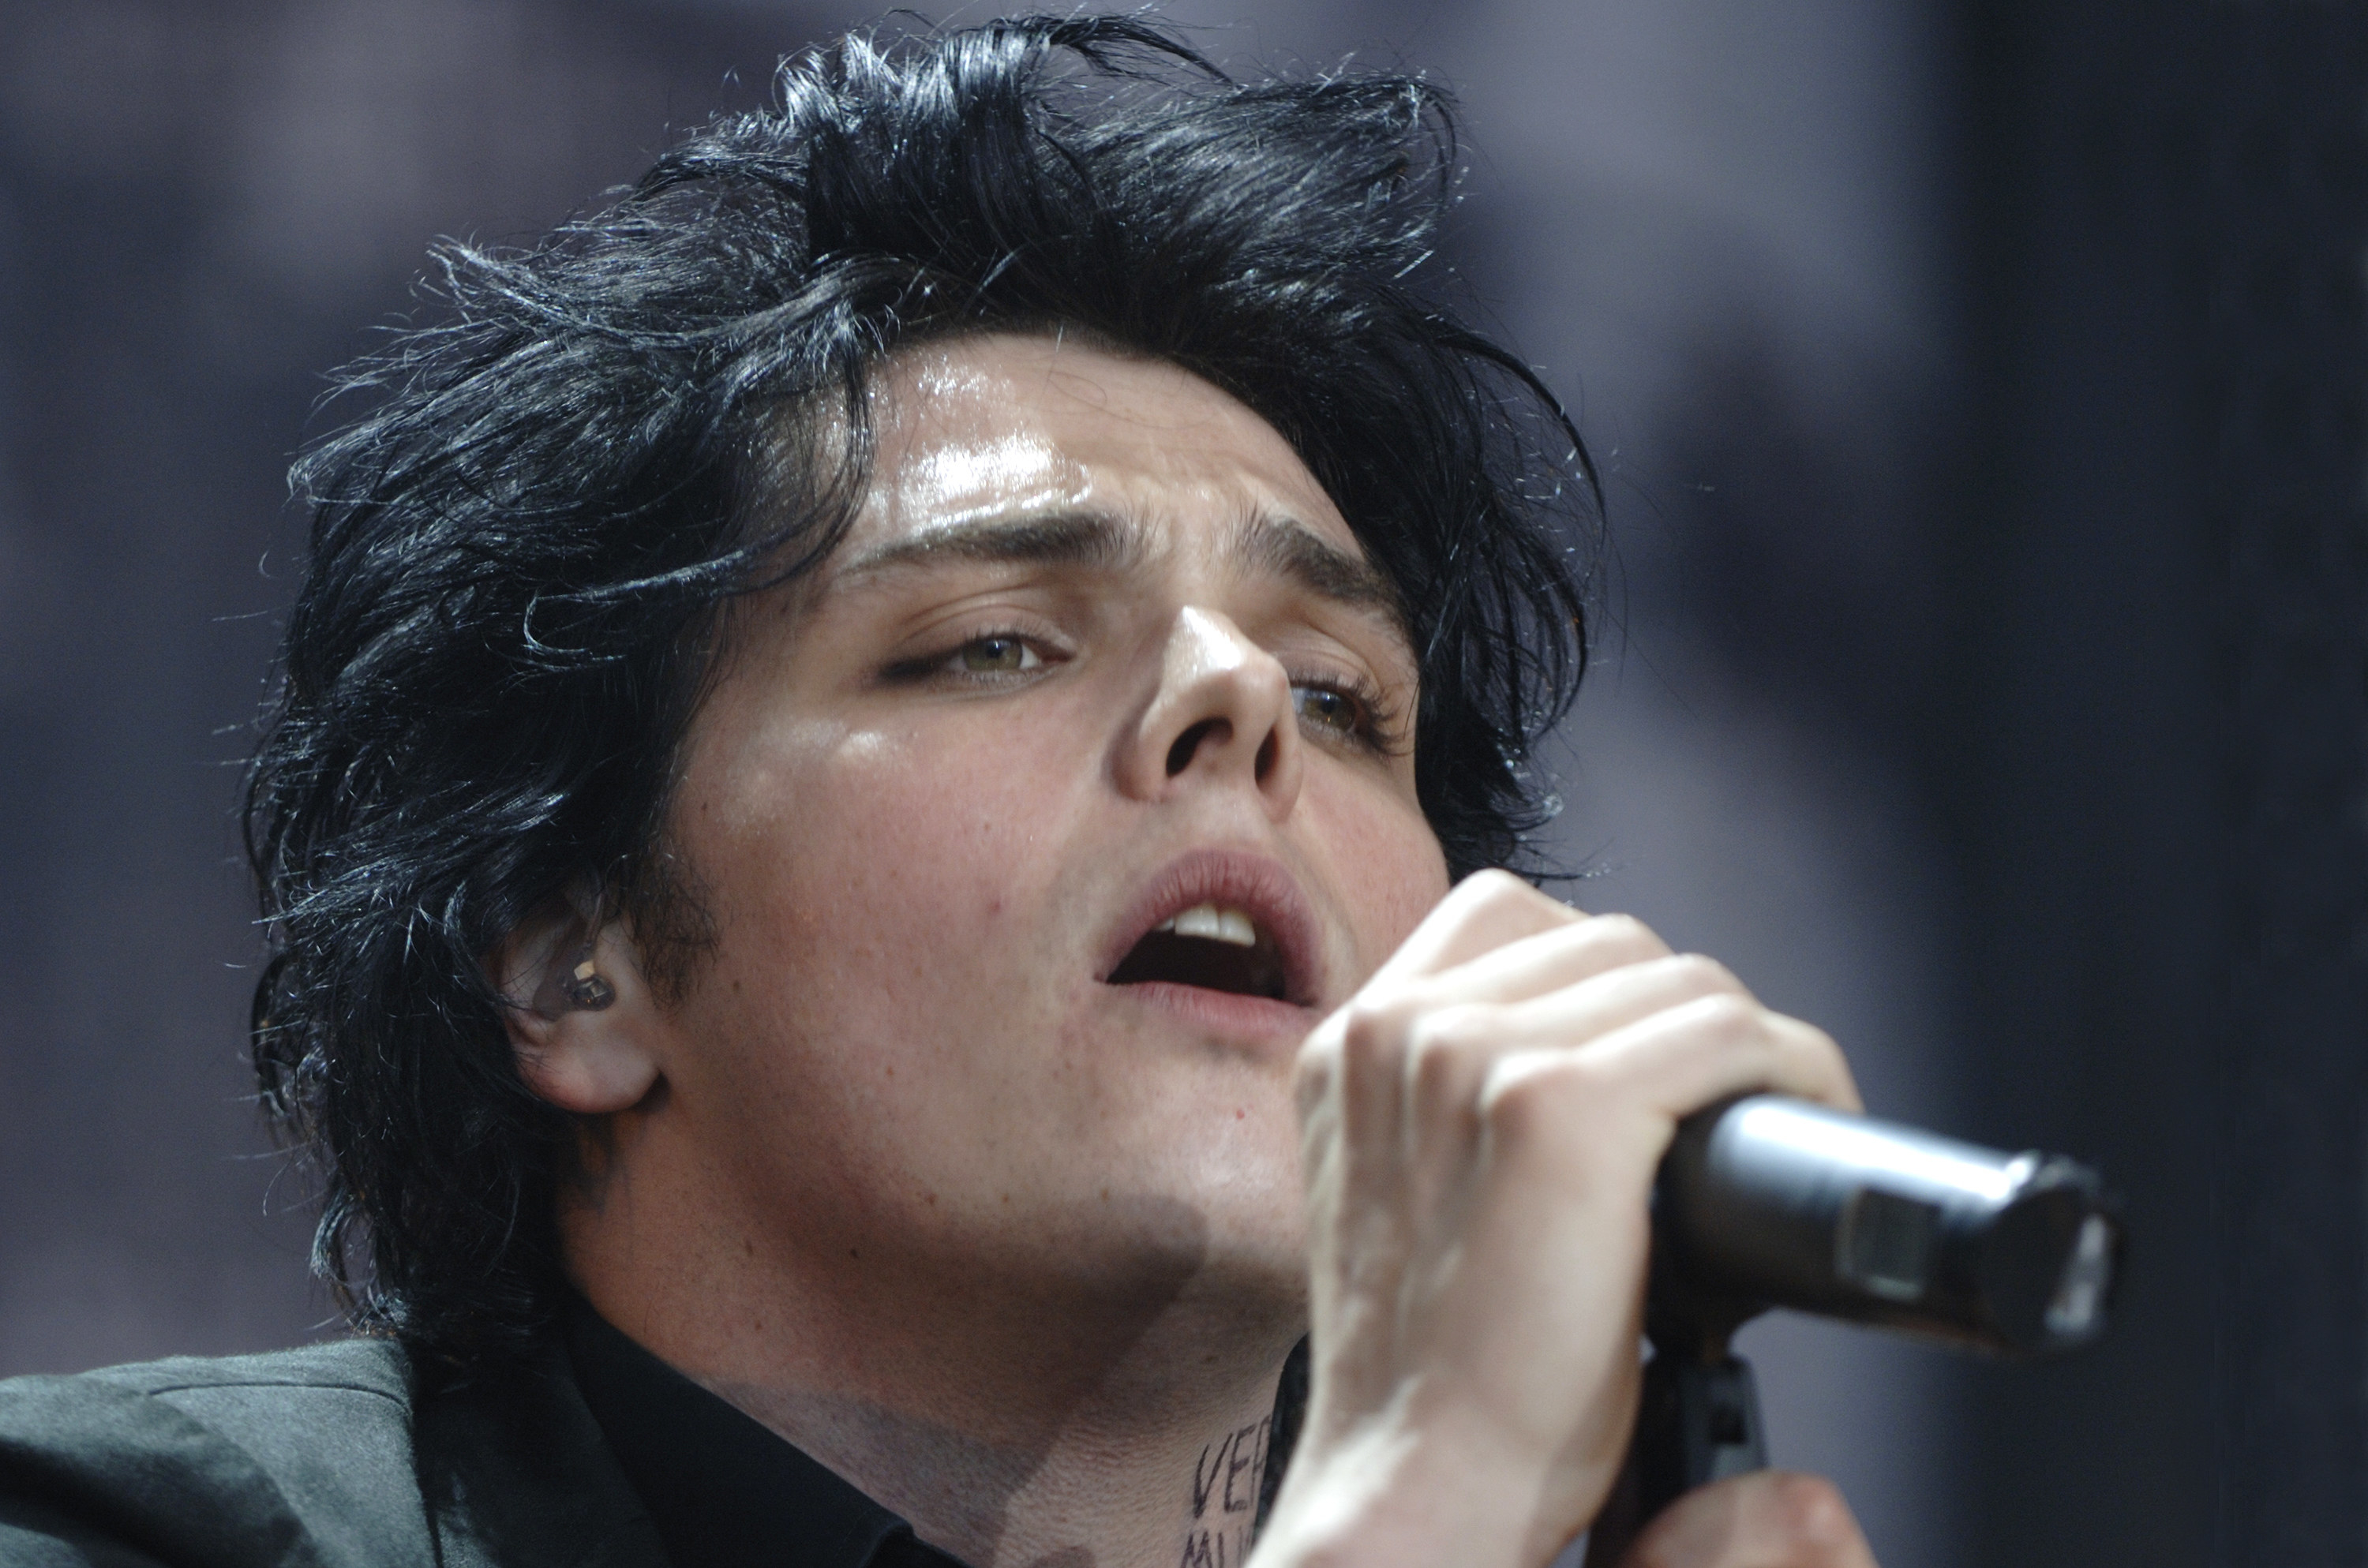 Gerard Way of My Chemical Romance performs during the Projekt Revolution tour